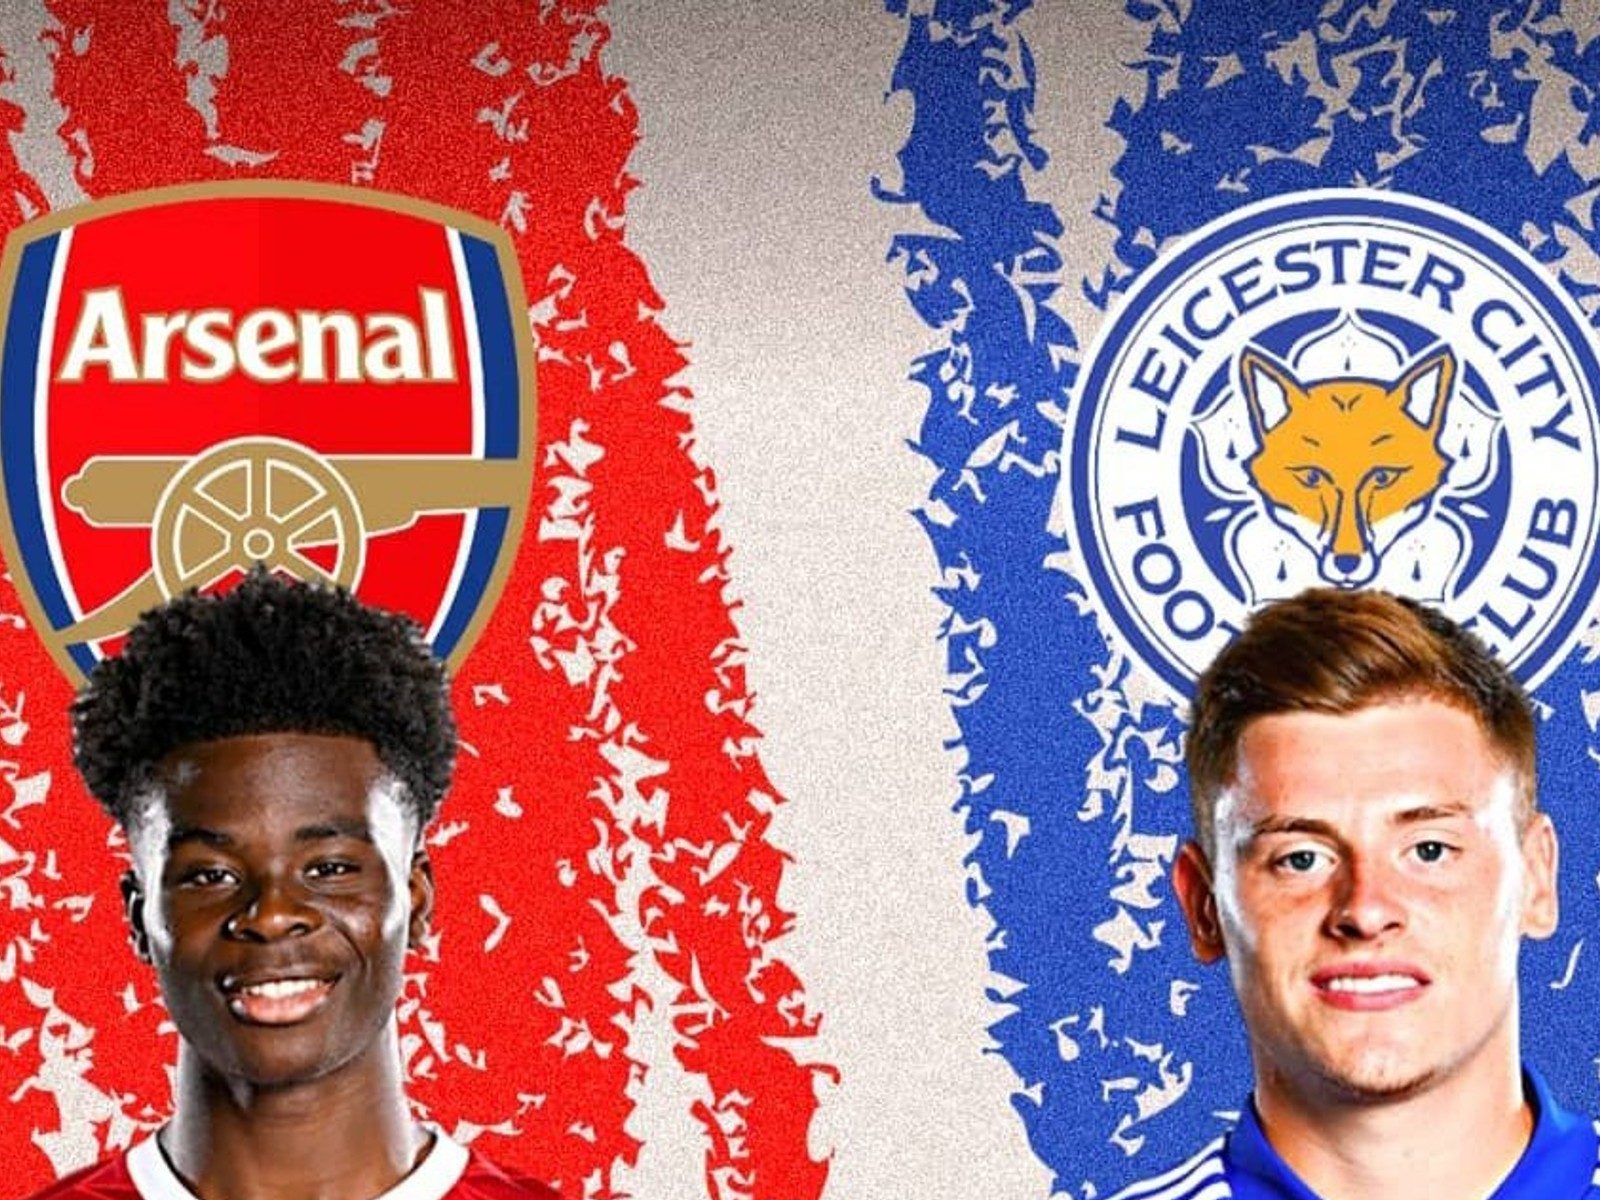 Premier League 2021-22 Arsenal vs Leicester City LIVE Streaming When and Where to Watch Online, TV Telecast, Team News